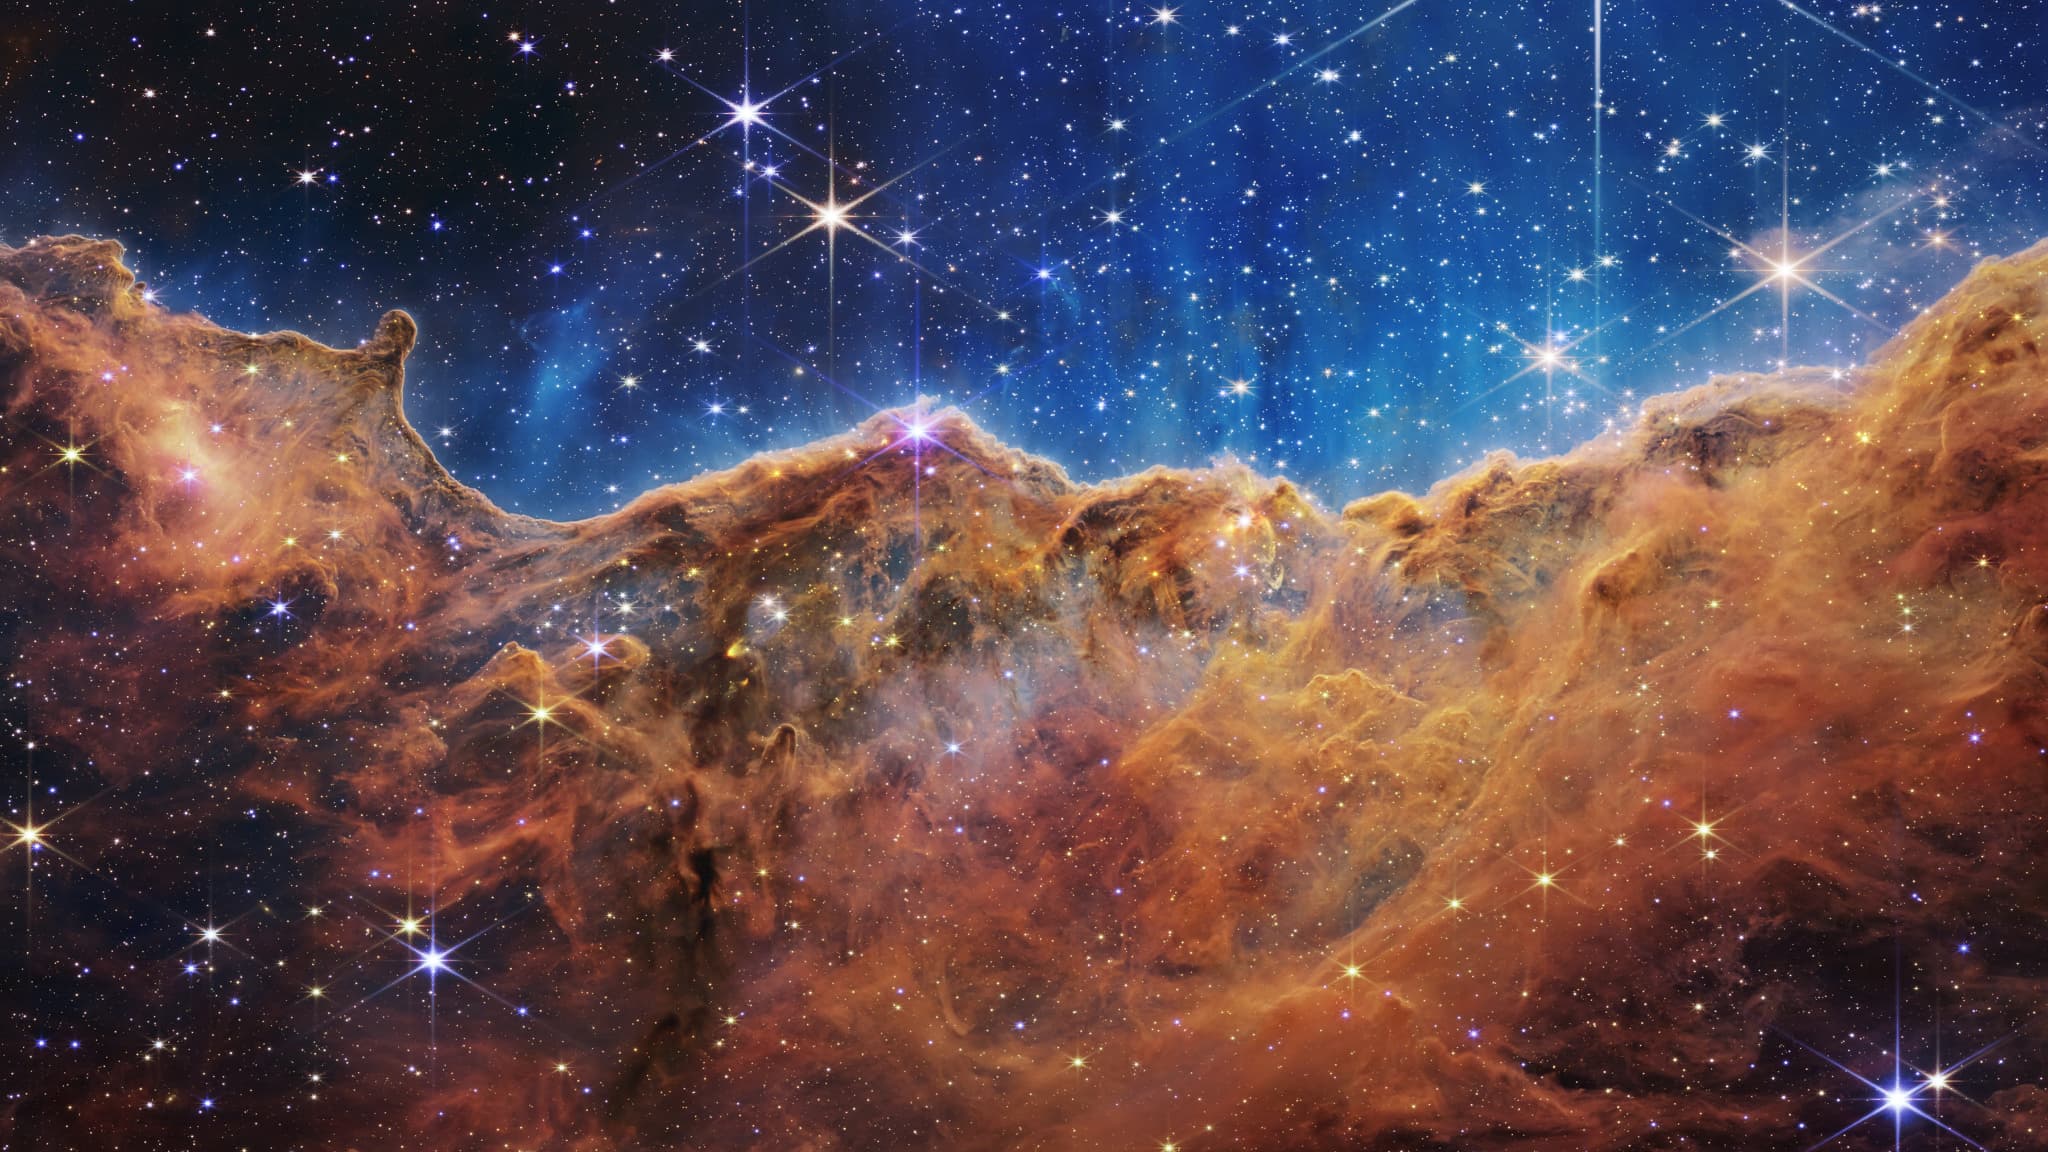 Nebulae And Stars The James Webb Telescope Reveals Extraordinary Images Of The Universe